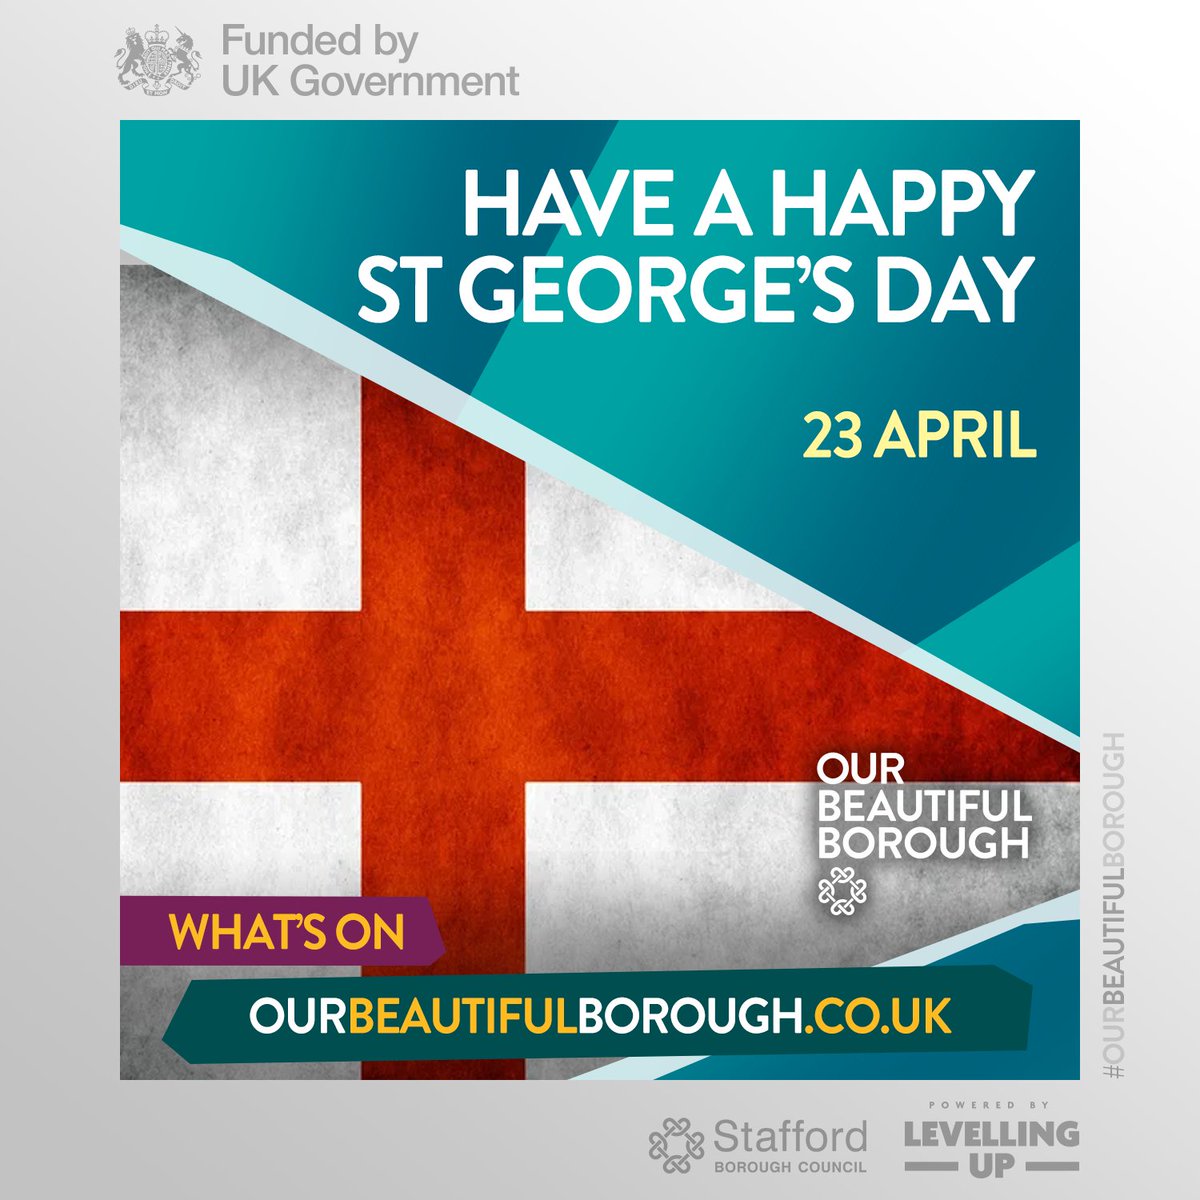 From the heart of #StaffordBorough, through the creative county of #Staffordshire, across every region of #England, we wish you all a very Happy #StGeorgesDay 🏴󠁧󠁢󠁥󠁮󠁧󠁿 🏴󠁧󠁢󠁥󠁮󠁧󠁿 🏴󠁧󠁢󠁥󠁮󠁧󠁿 #SpecialOccasions #OurBeautifulBorough